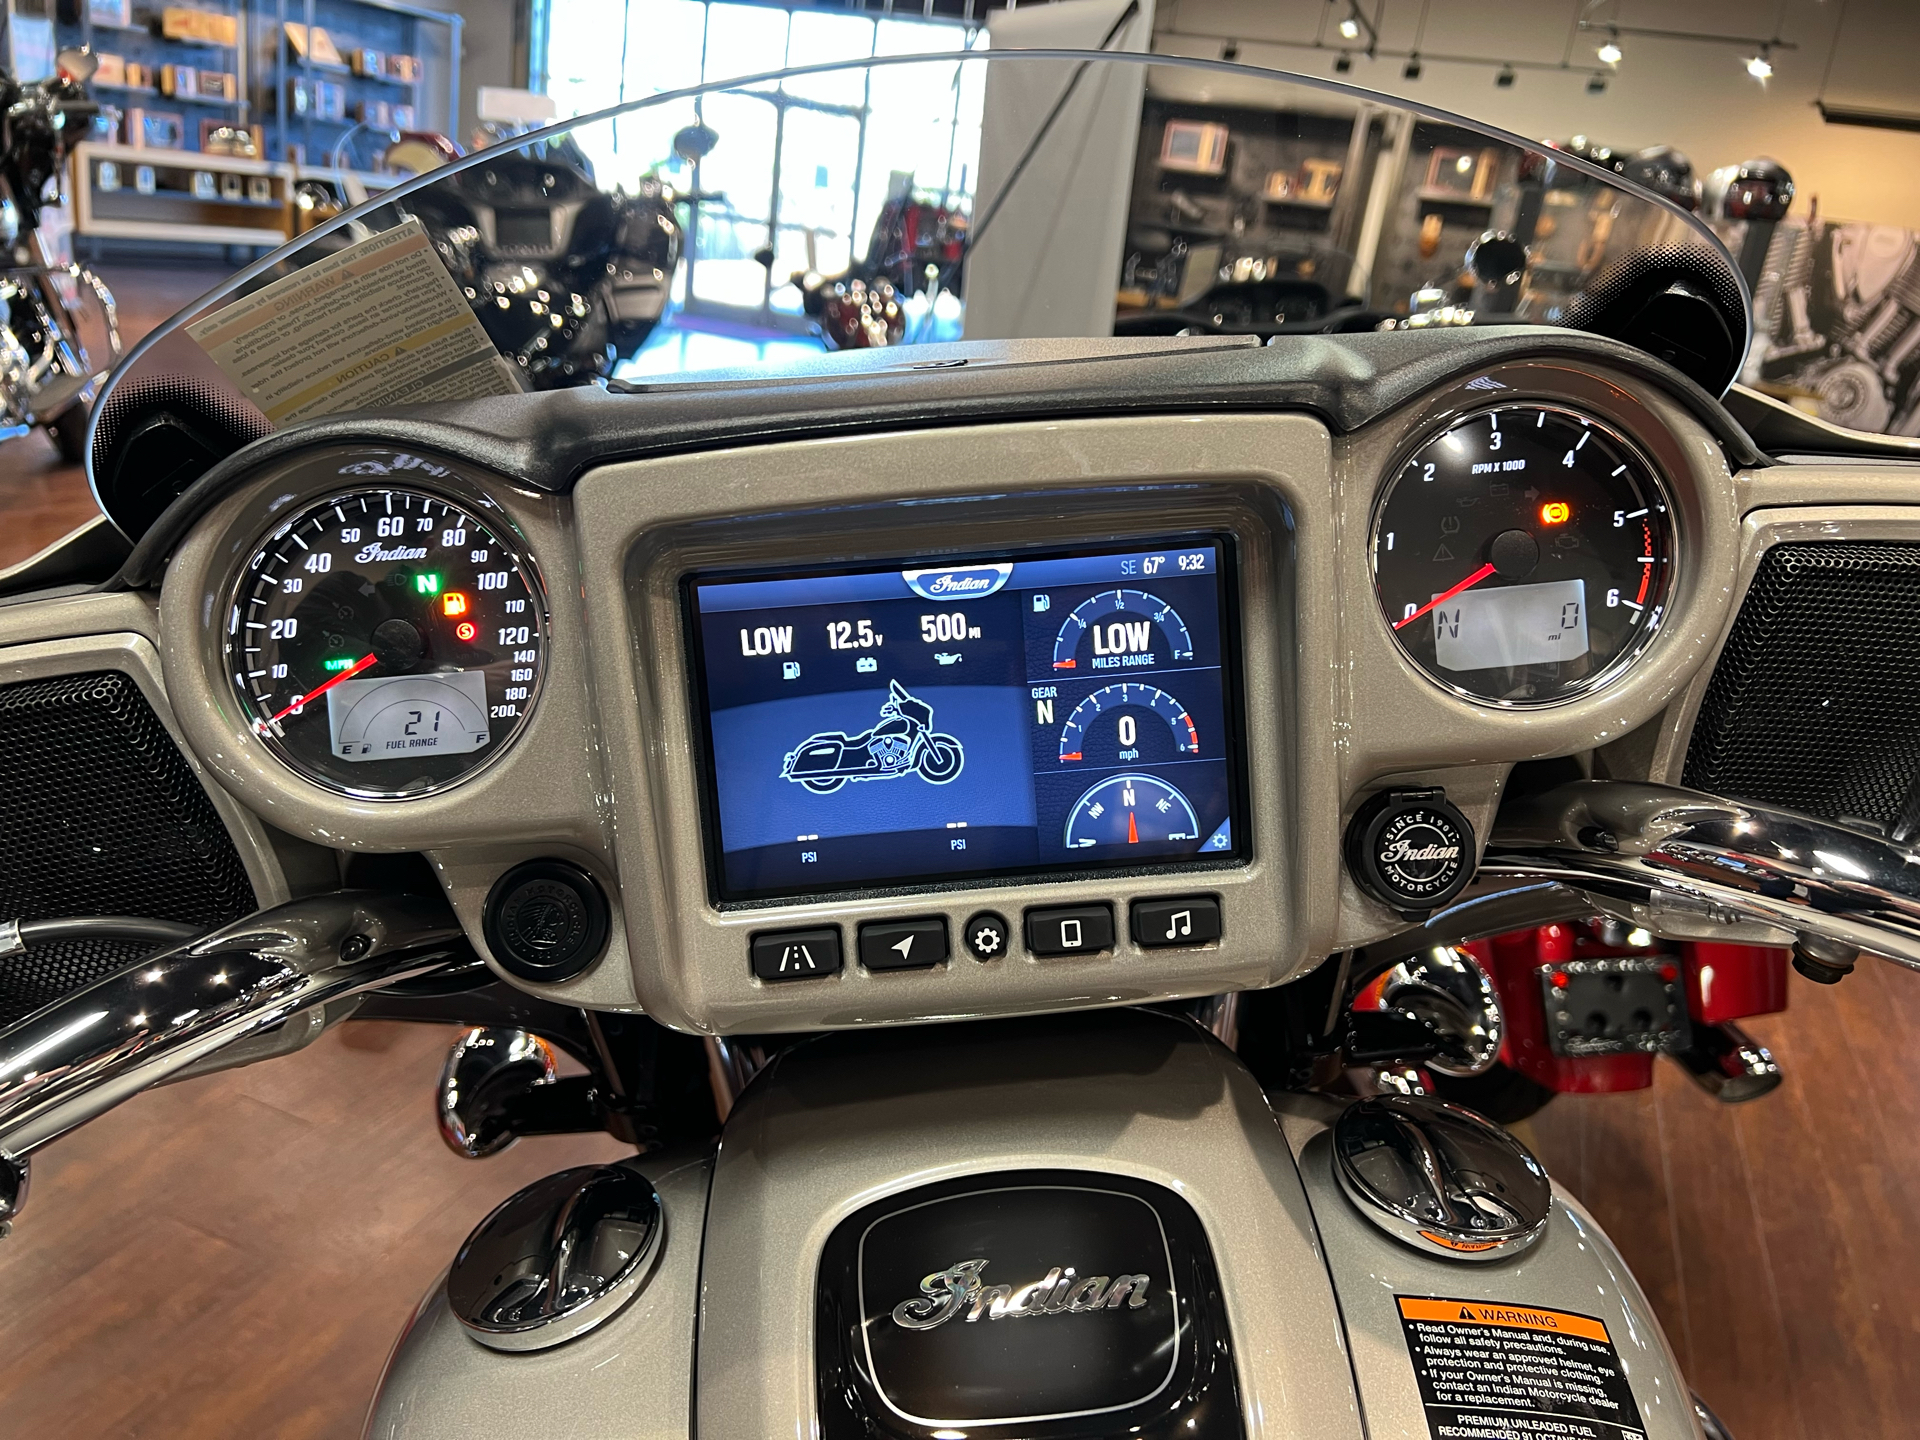 2022 Indian Chieftain® Limited in Chesapeake, Virginia - Photo 9